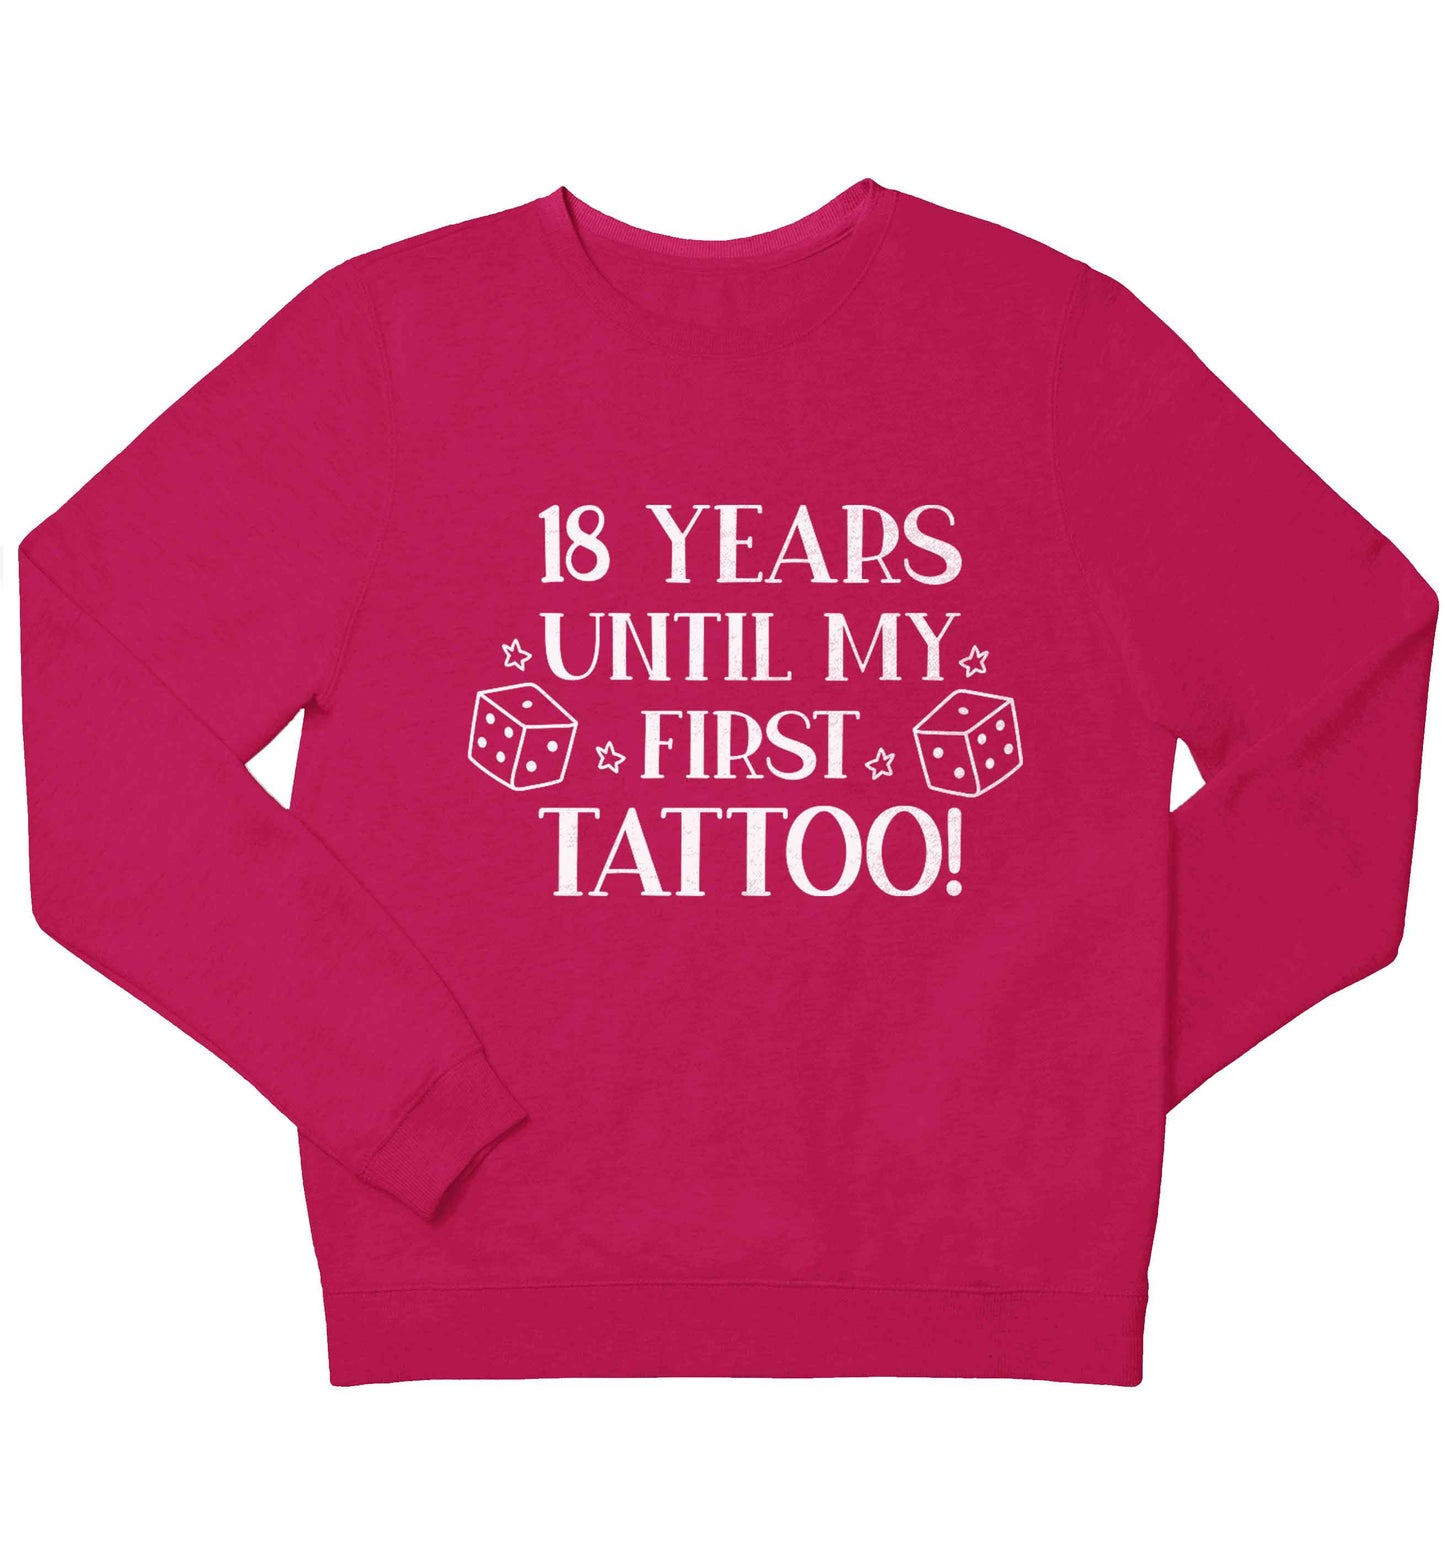 18 Years Until my First Tattoo children's pink sweater 12-13 Years